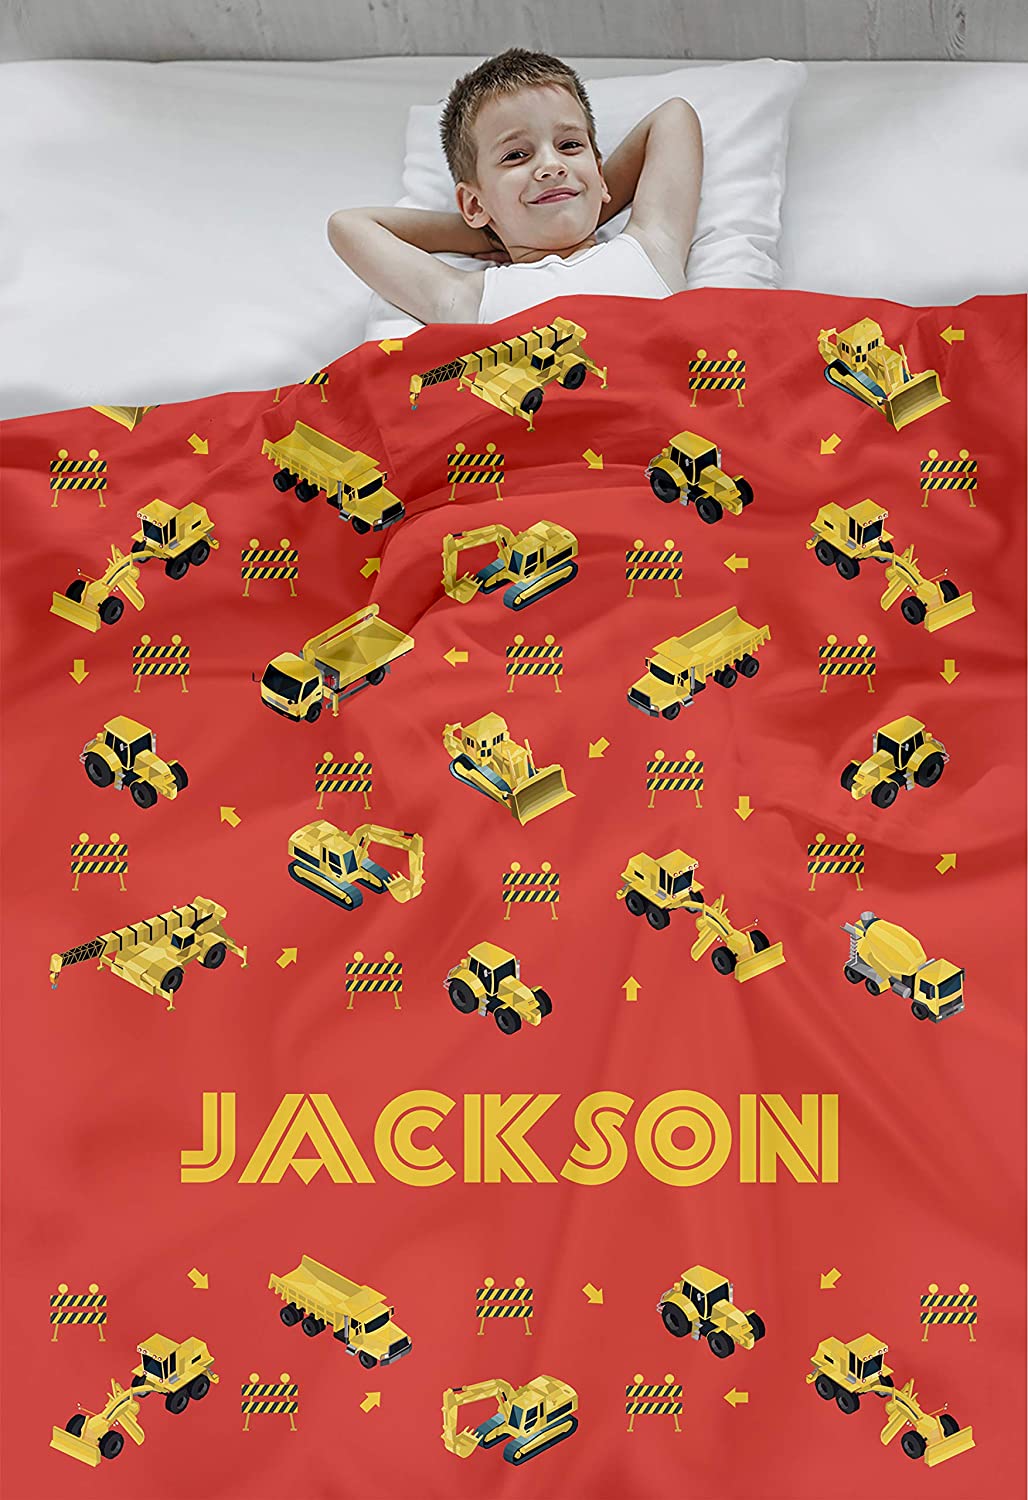 Personalized Custom Cozy Plush Fleece Blanket (Construction Vehicles Red), Ships from US - Add Your Name - Customizable Throw Keepsake Blanket Babies, Boys,...